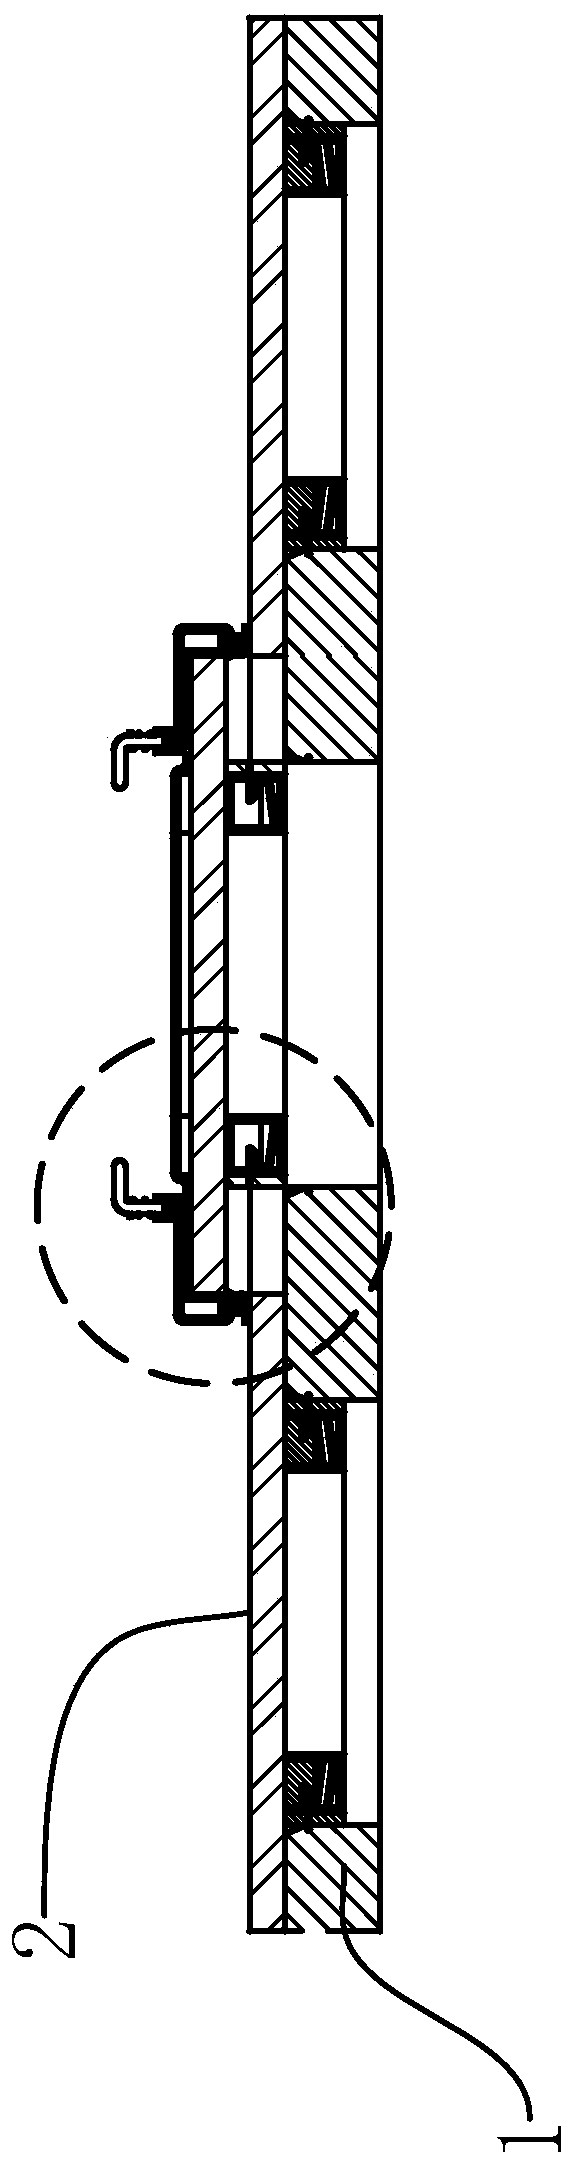 Safe and quick dismounting tool and panel dismounting method